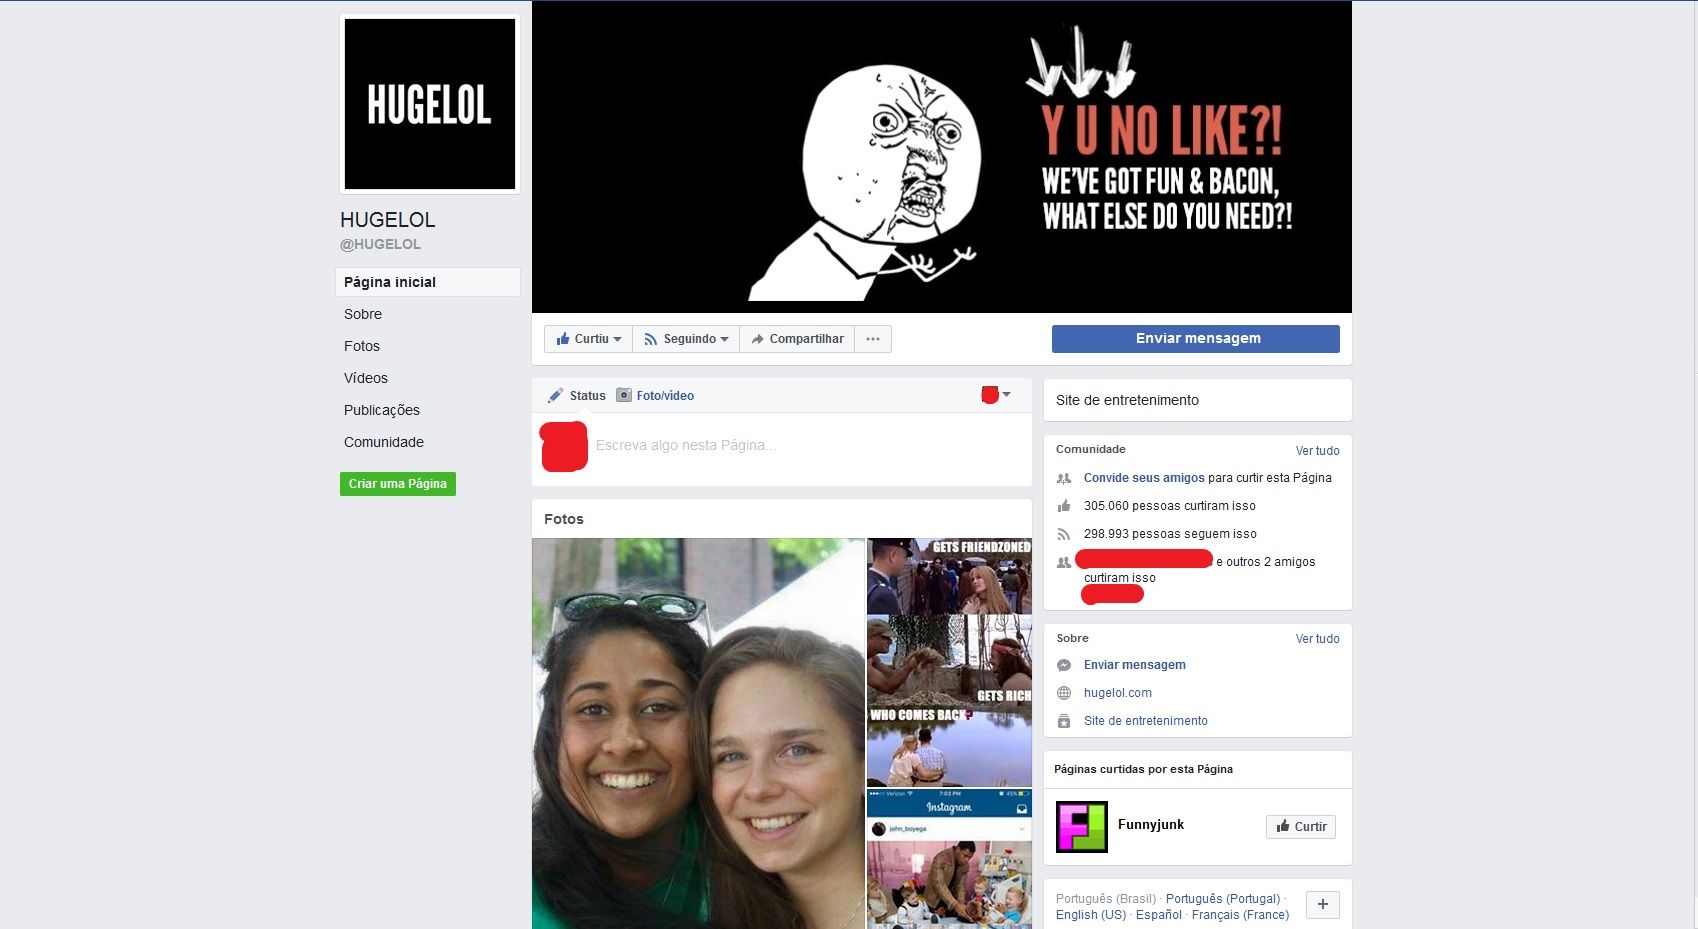 If you ever feel unfunny, just remember that Hugelol has a Facebook page and it is pure cancer